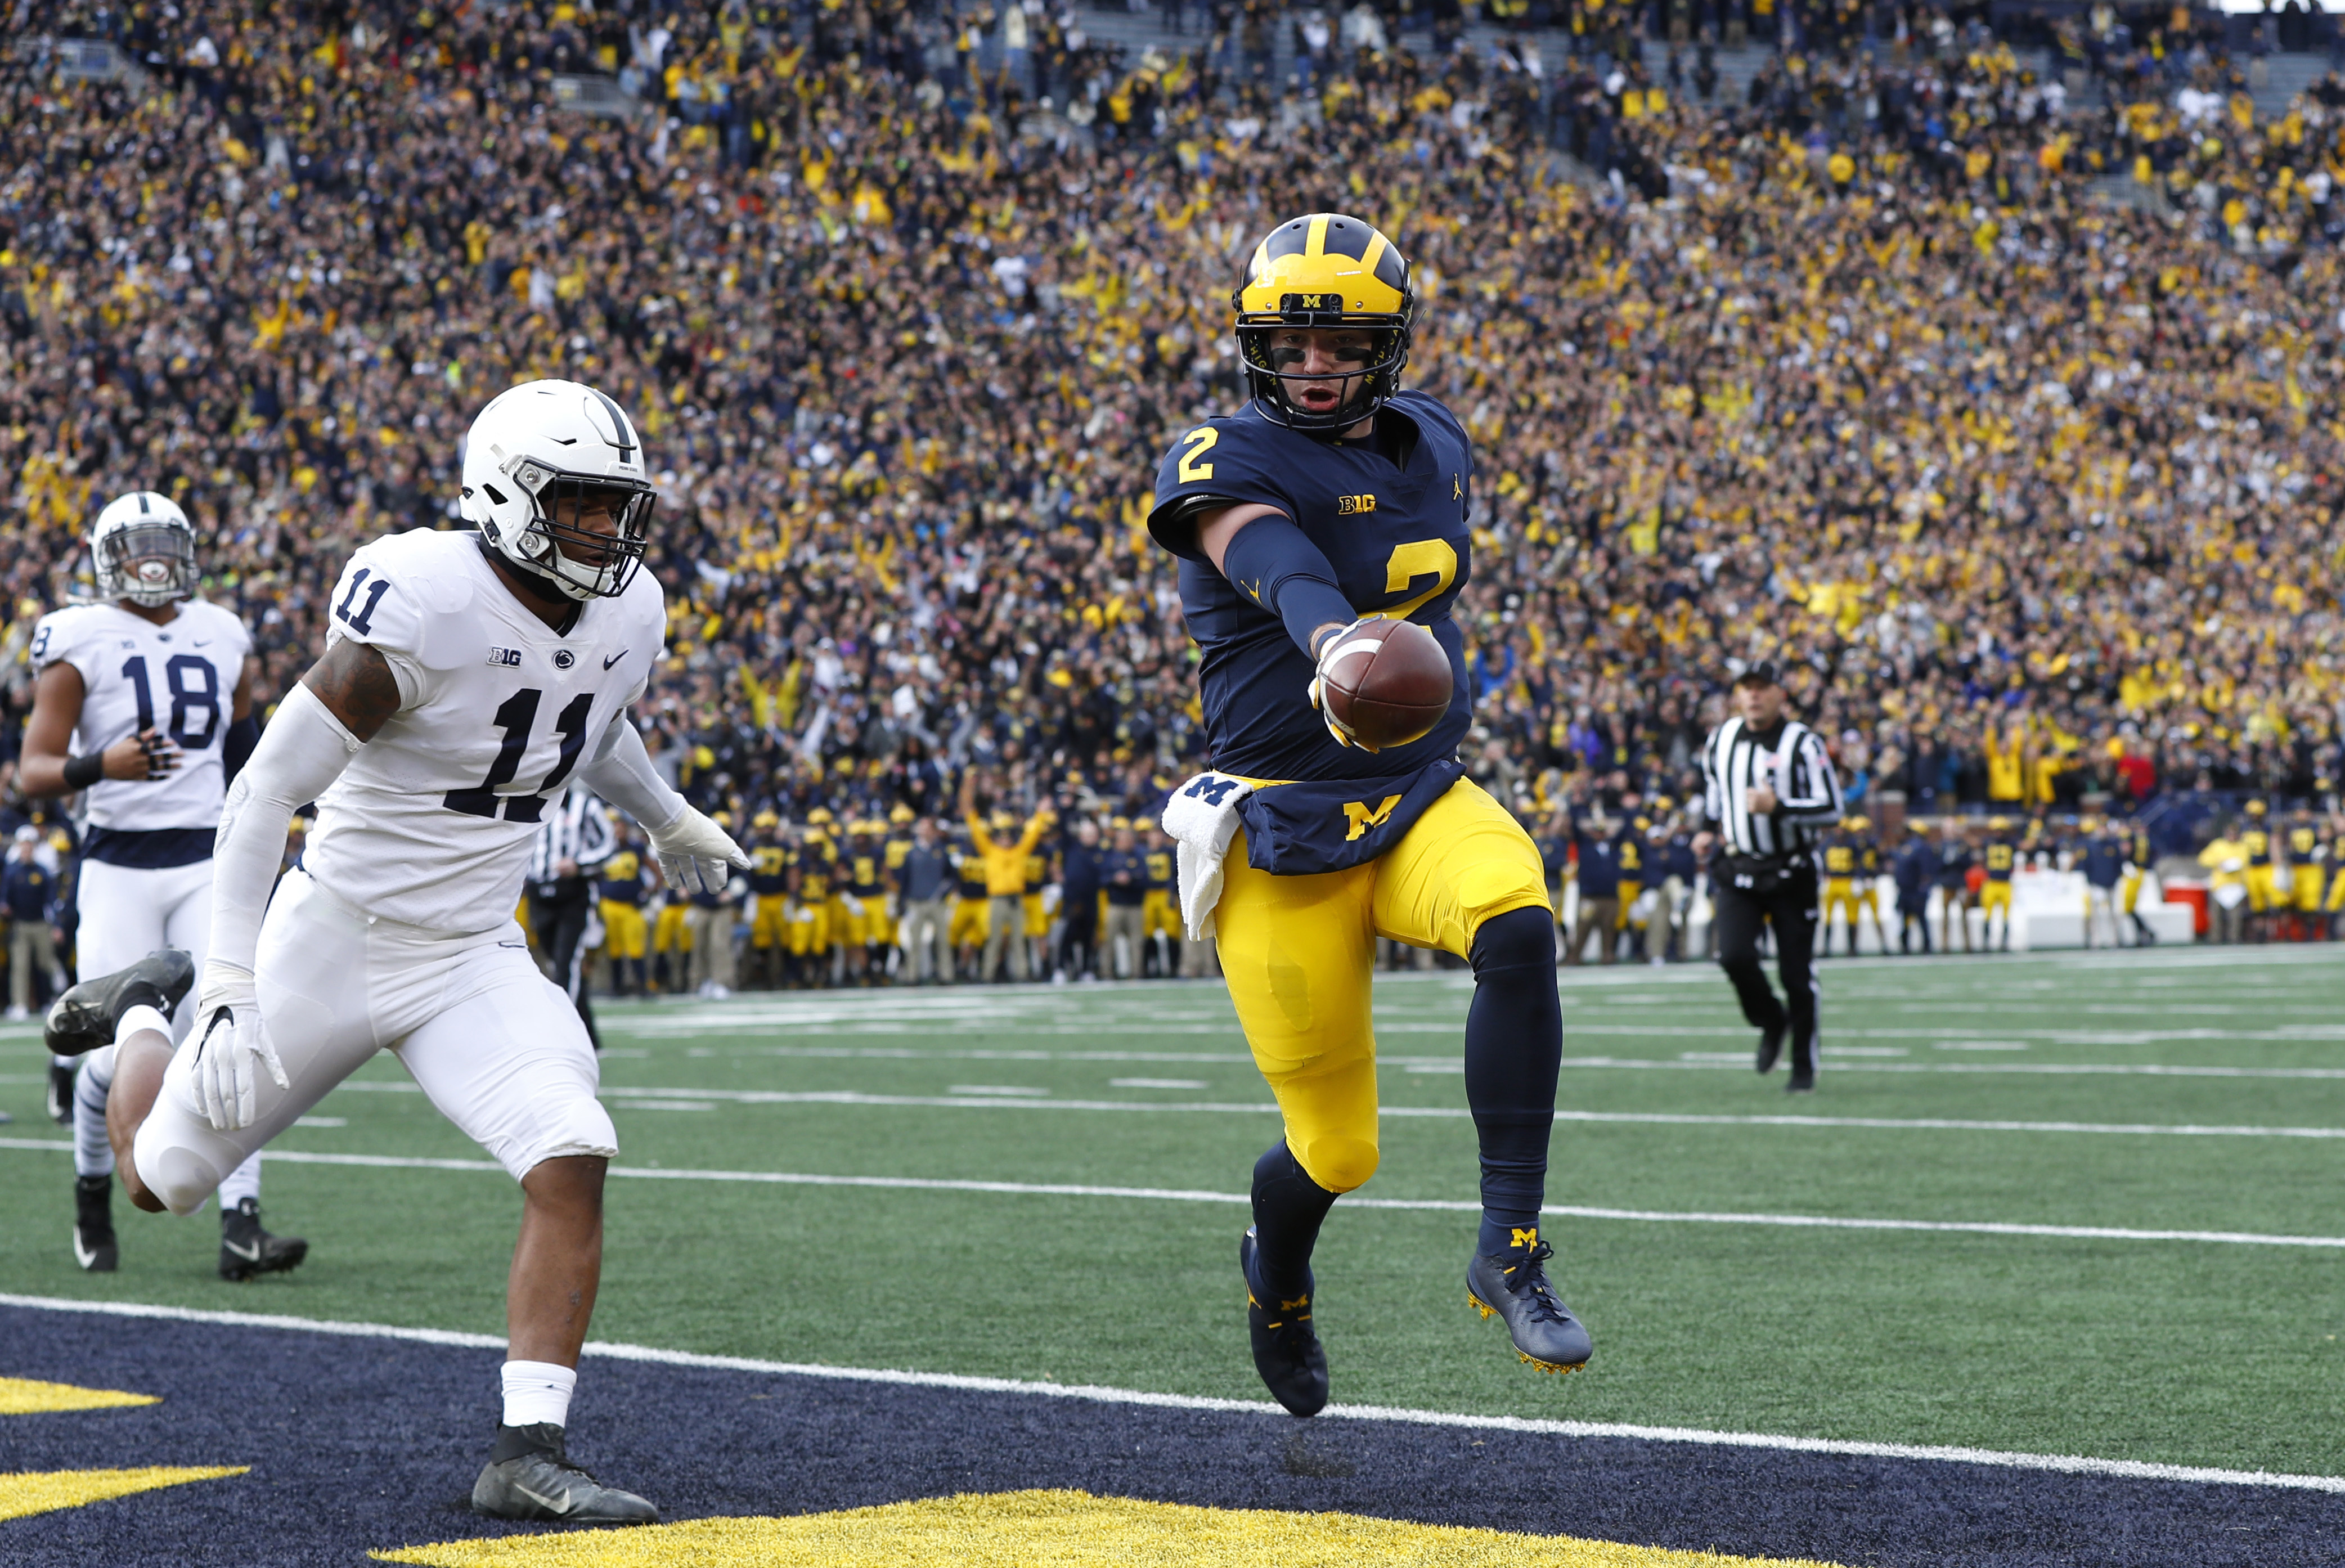 Top 25 Takeaways: Michigan’s path to CFP; Holgo for the win